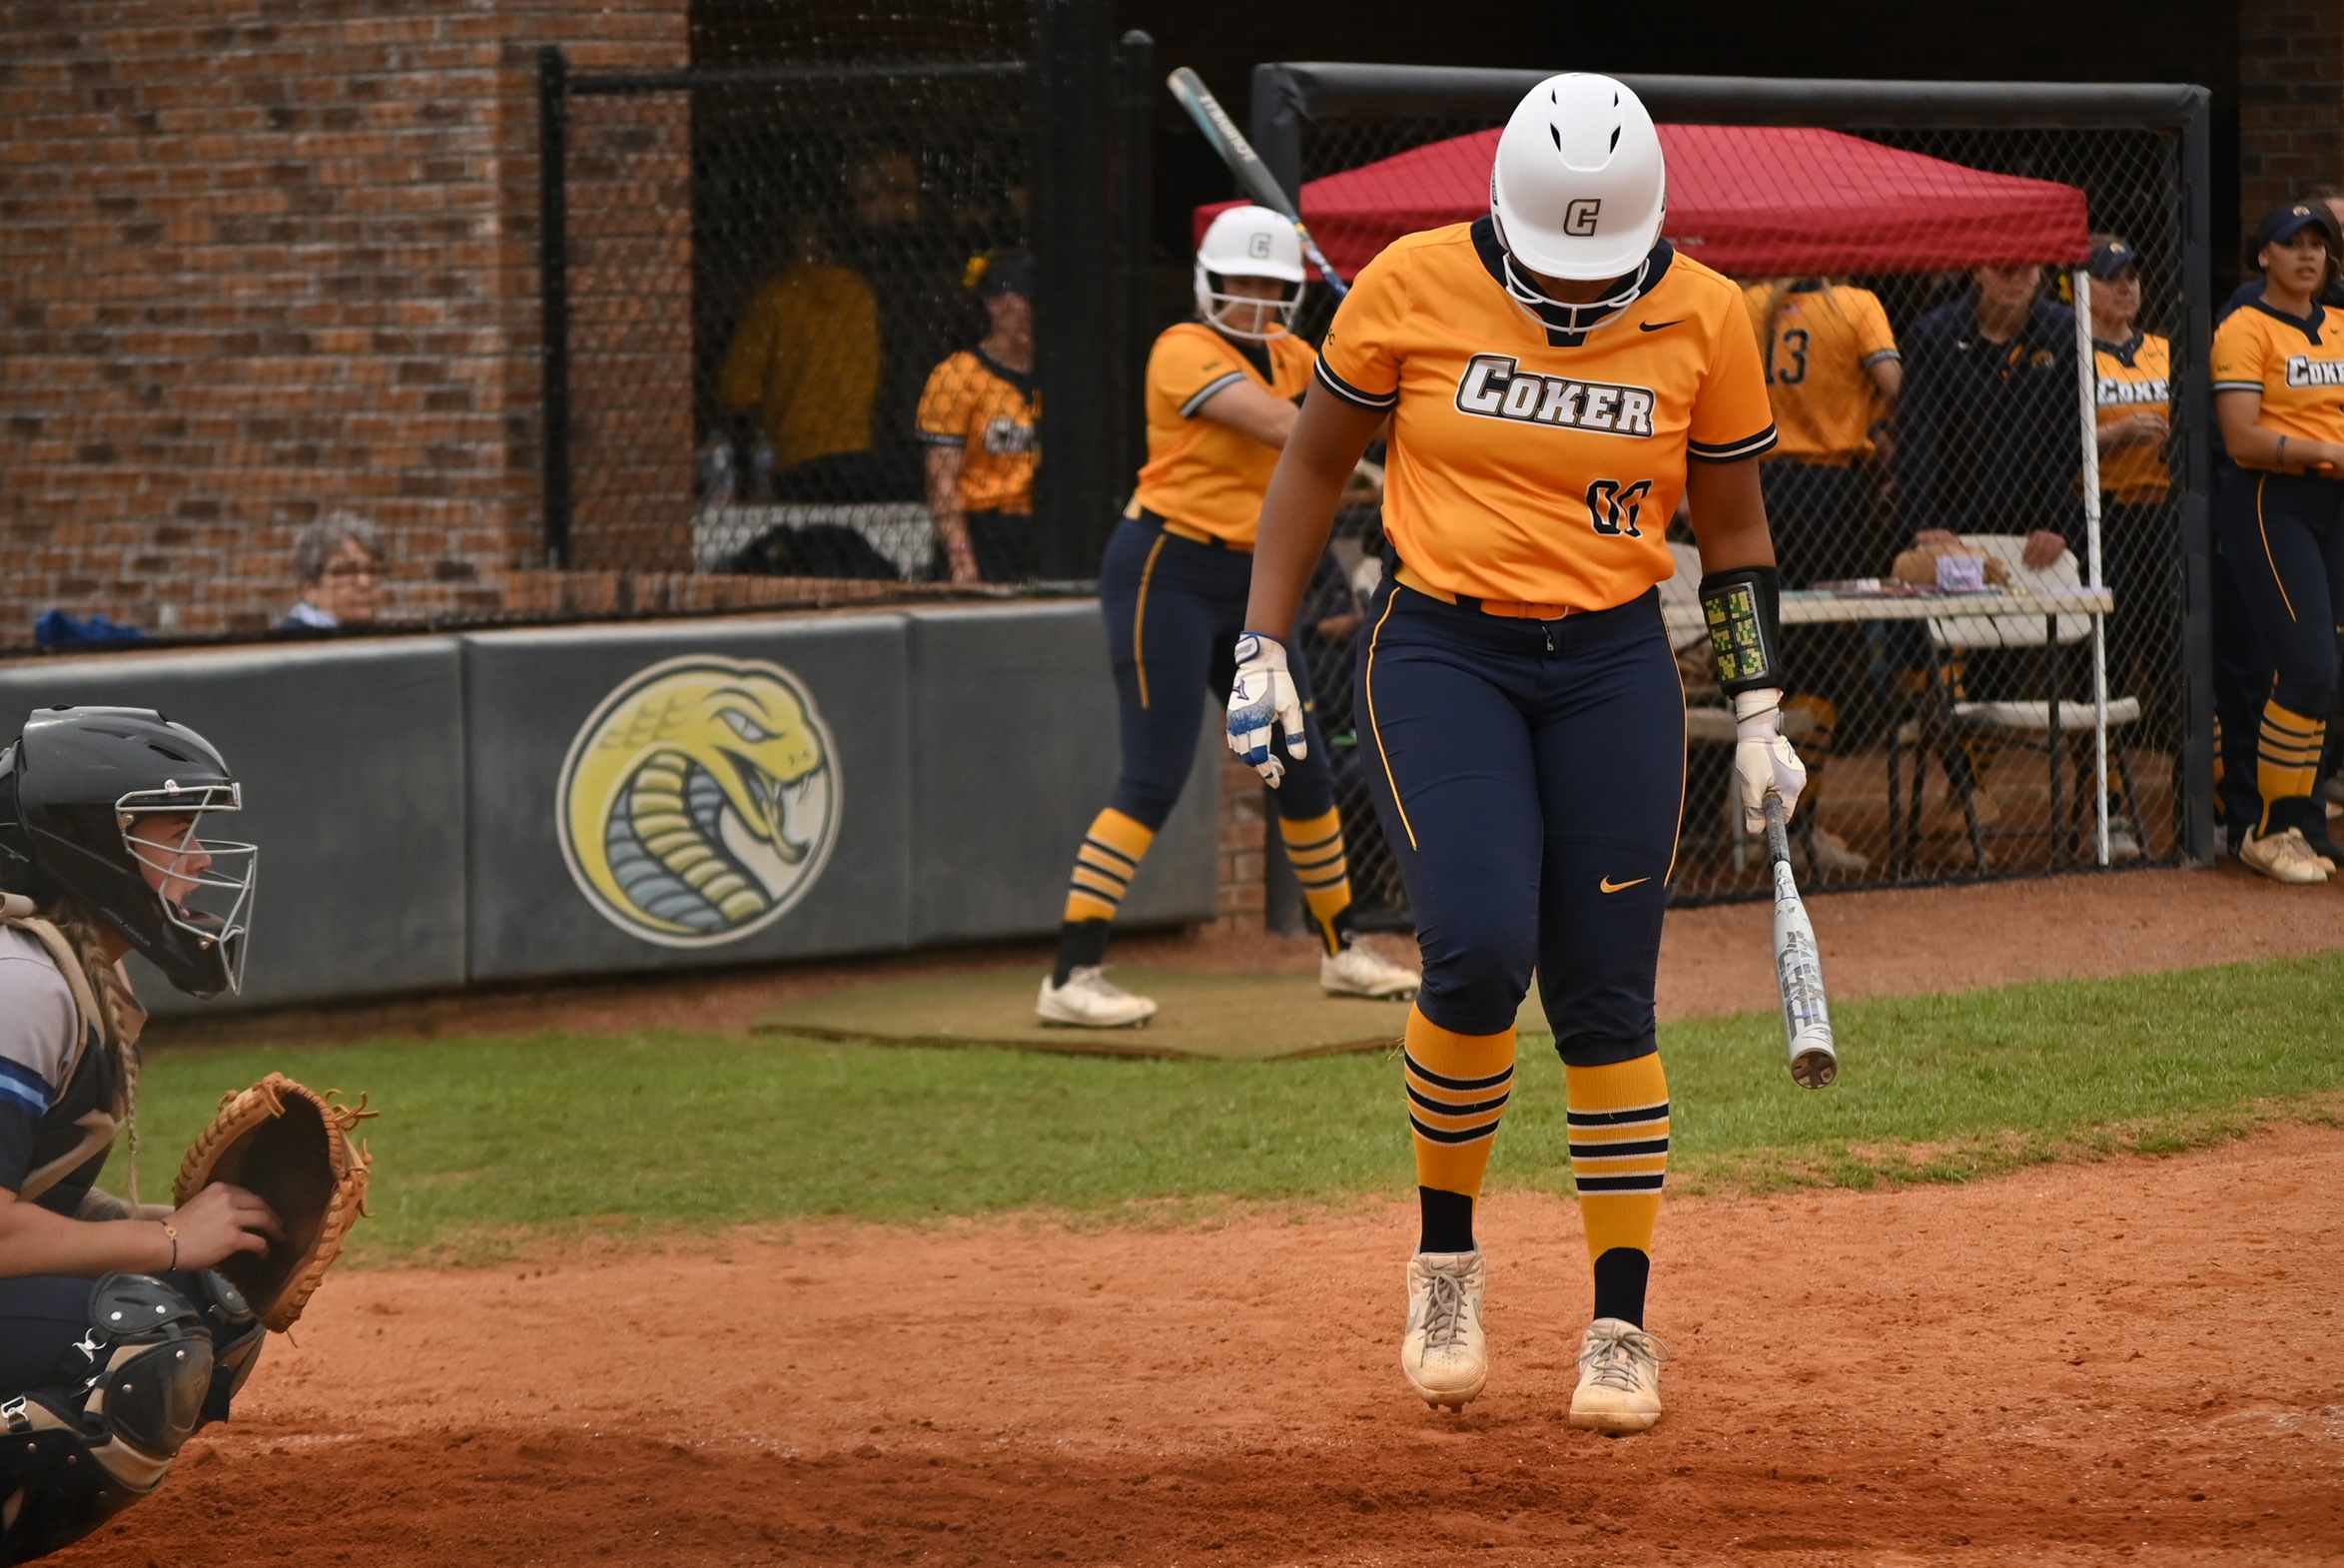 Coker Sweeps Adelphi and Shippensburg on First Day of Round Robin